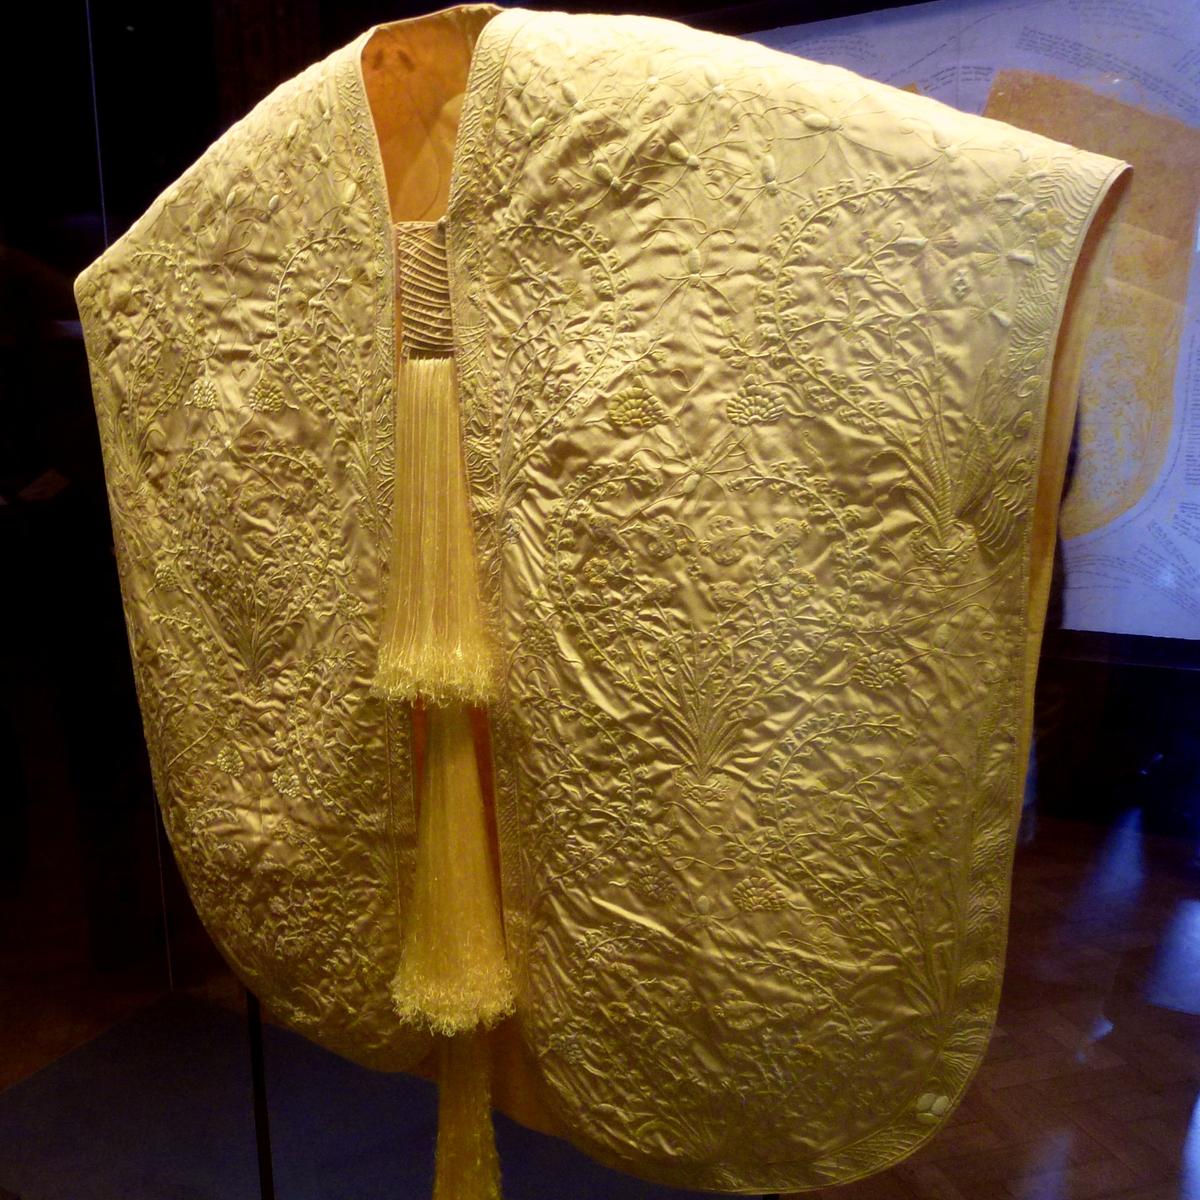 The cape on display at London's V&A Museum in June 2012 (<a href="https://commons.wikimedia.org/wiki/File:Spider_silk_cape.jpg">Cmglee</a>/CC BY-SA 3.0)